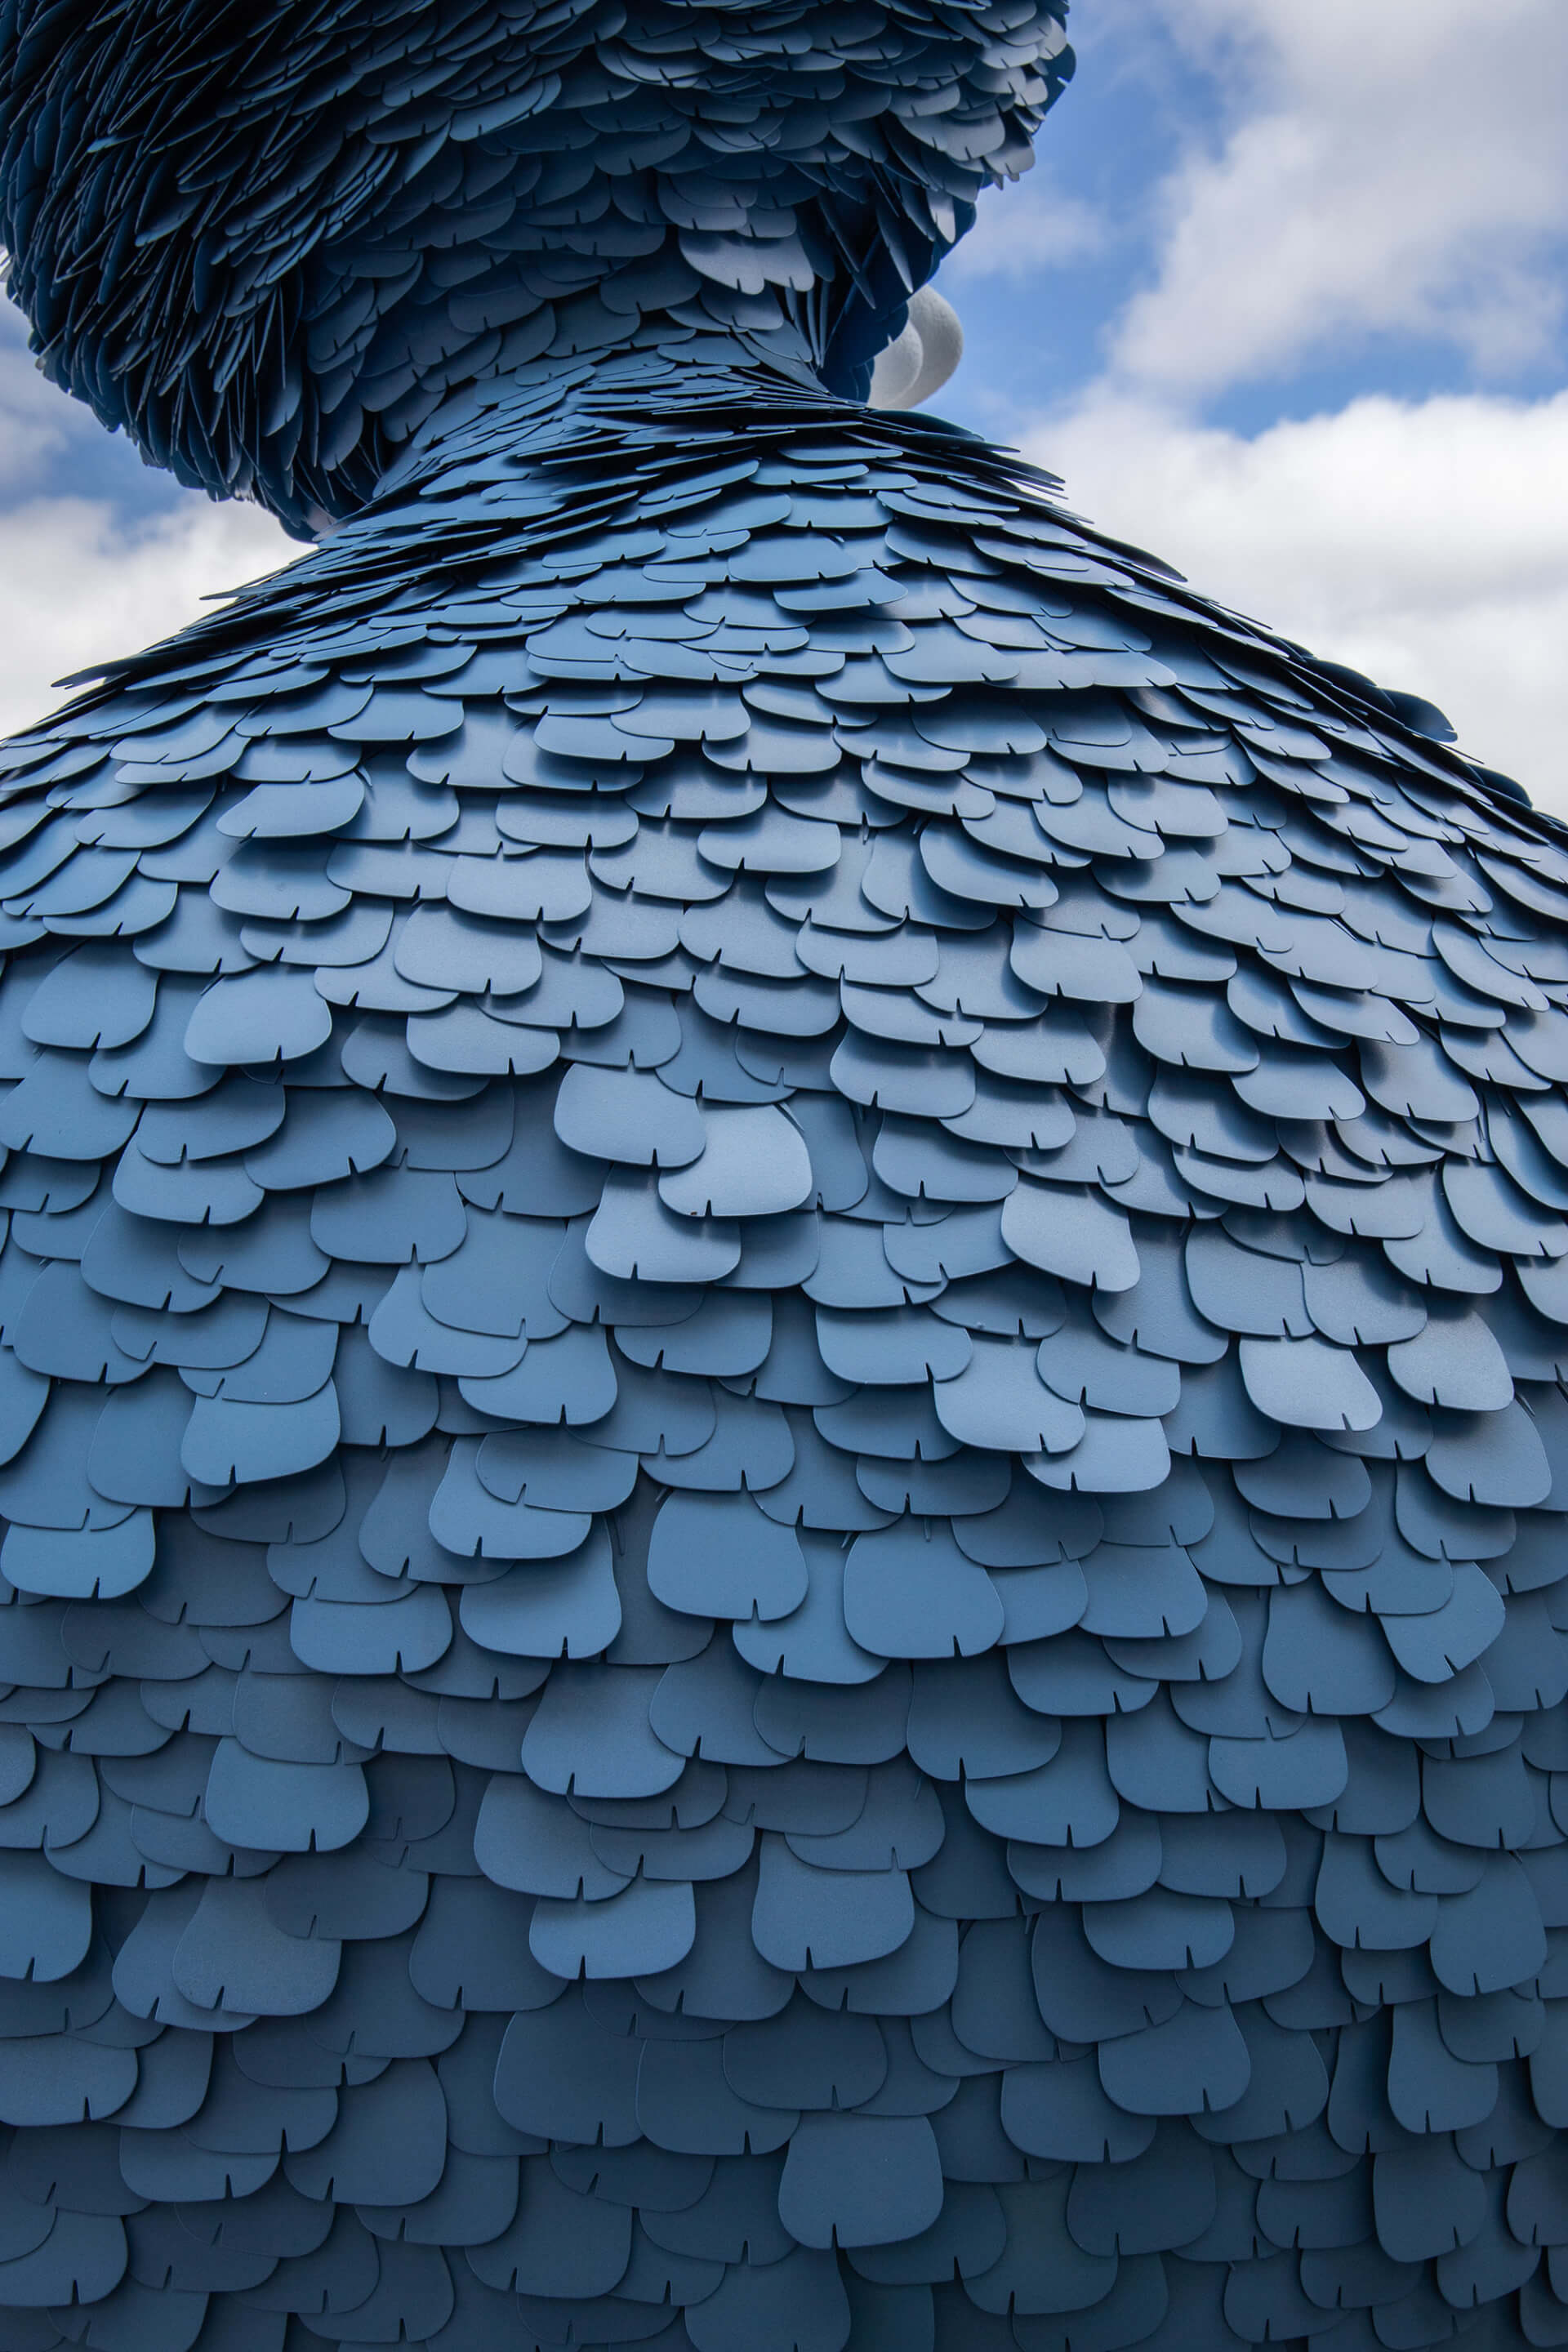 close up detail of a big bird statue made from blue metal shingles